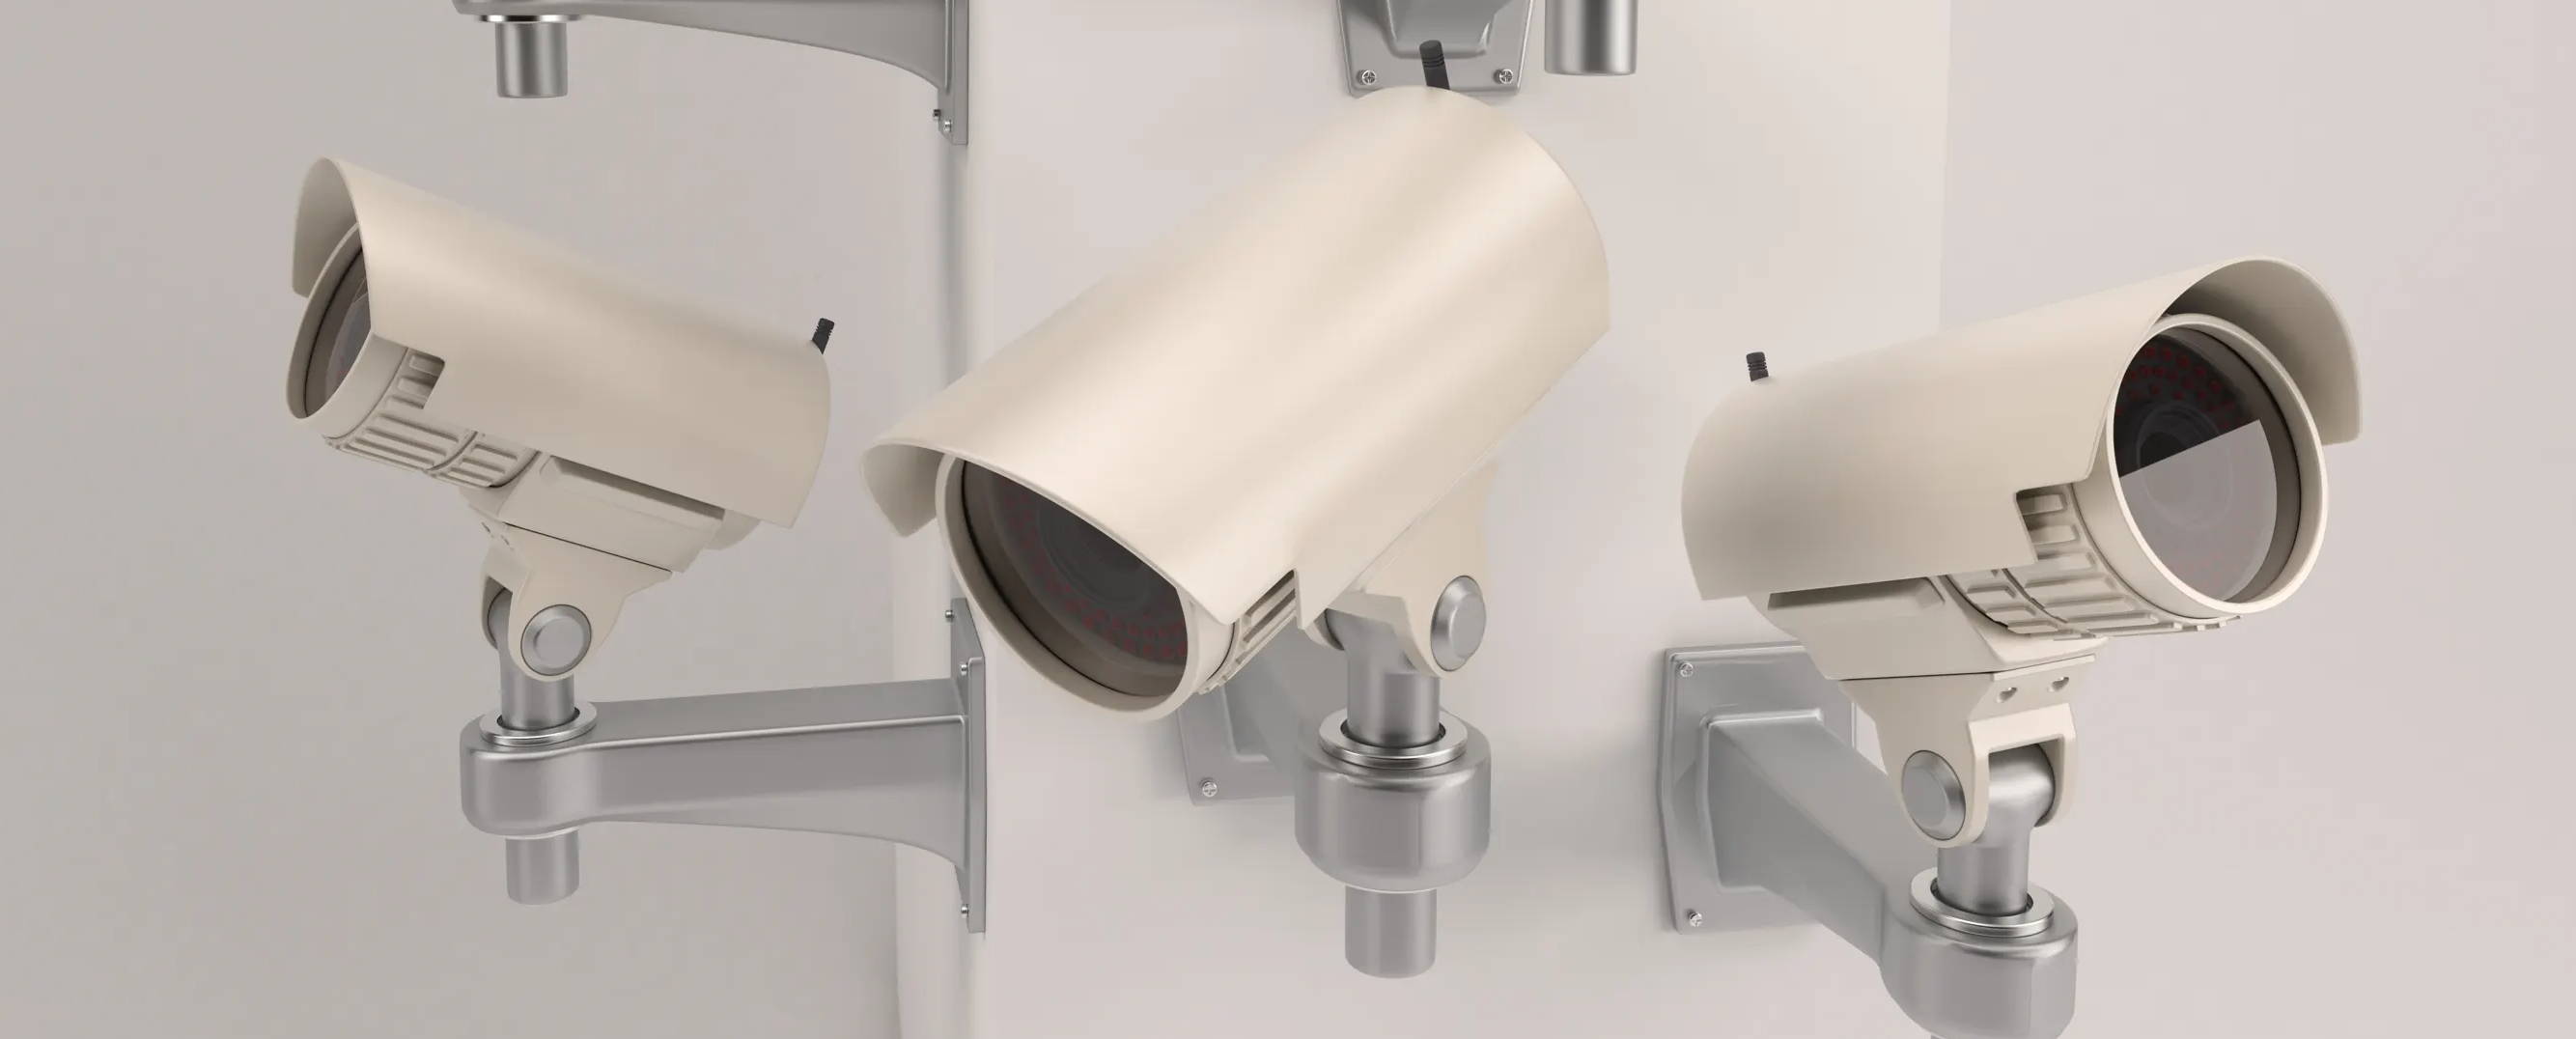 10 Reasons to Buy a Security Camera System